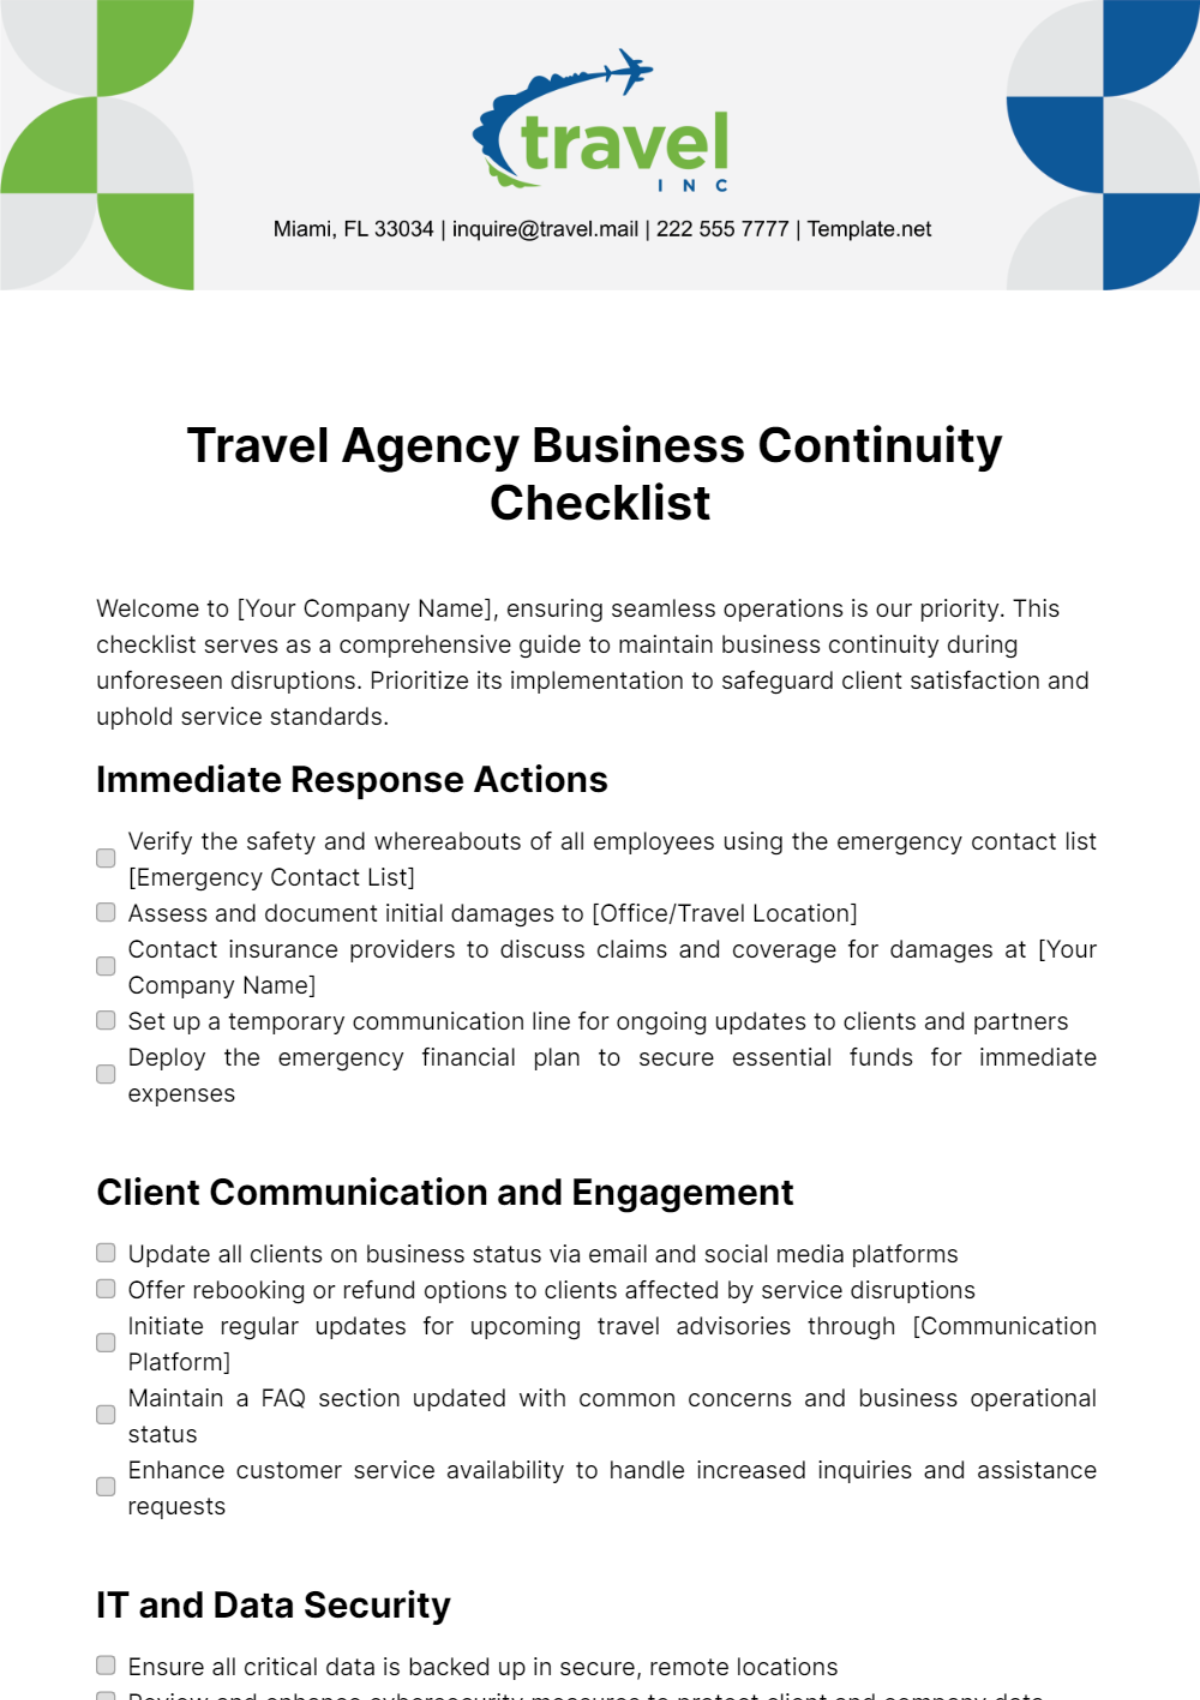 Travel Agency Business Continuity Checklist Template